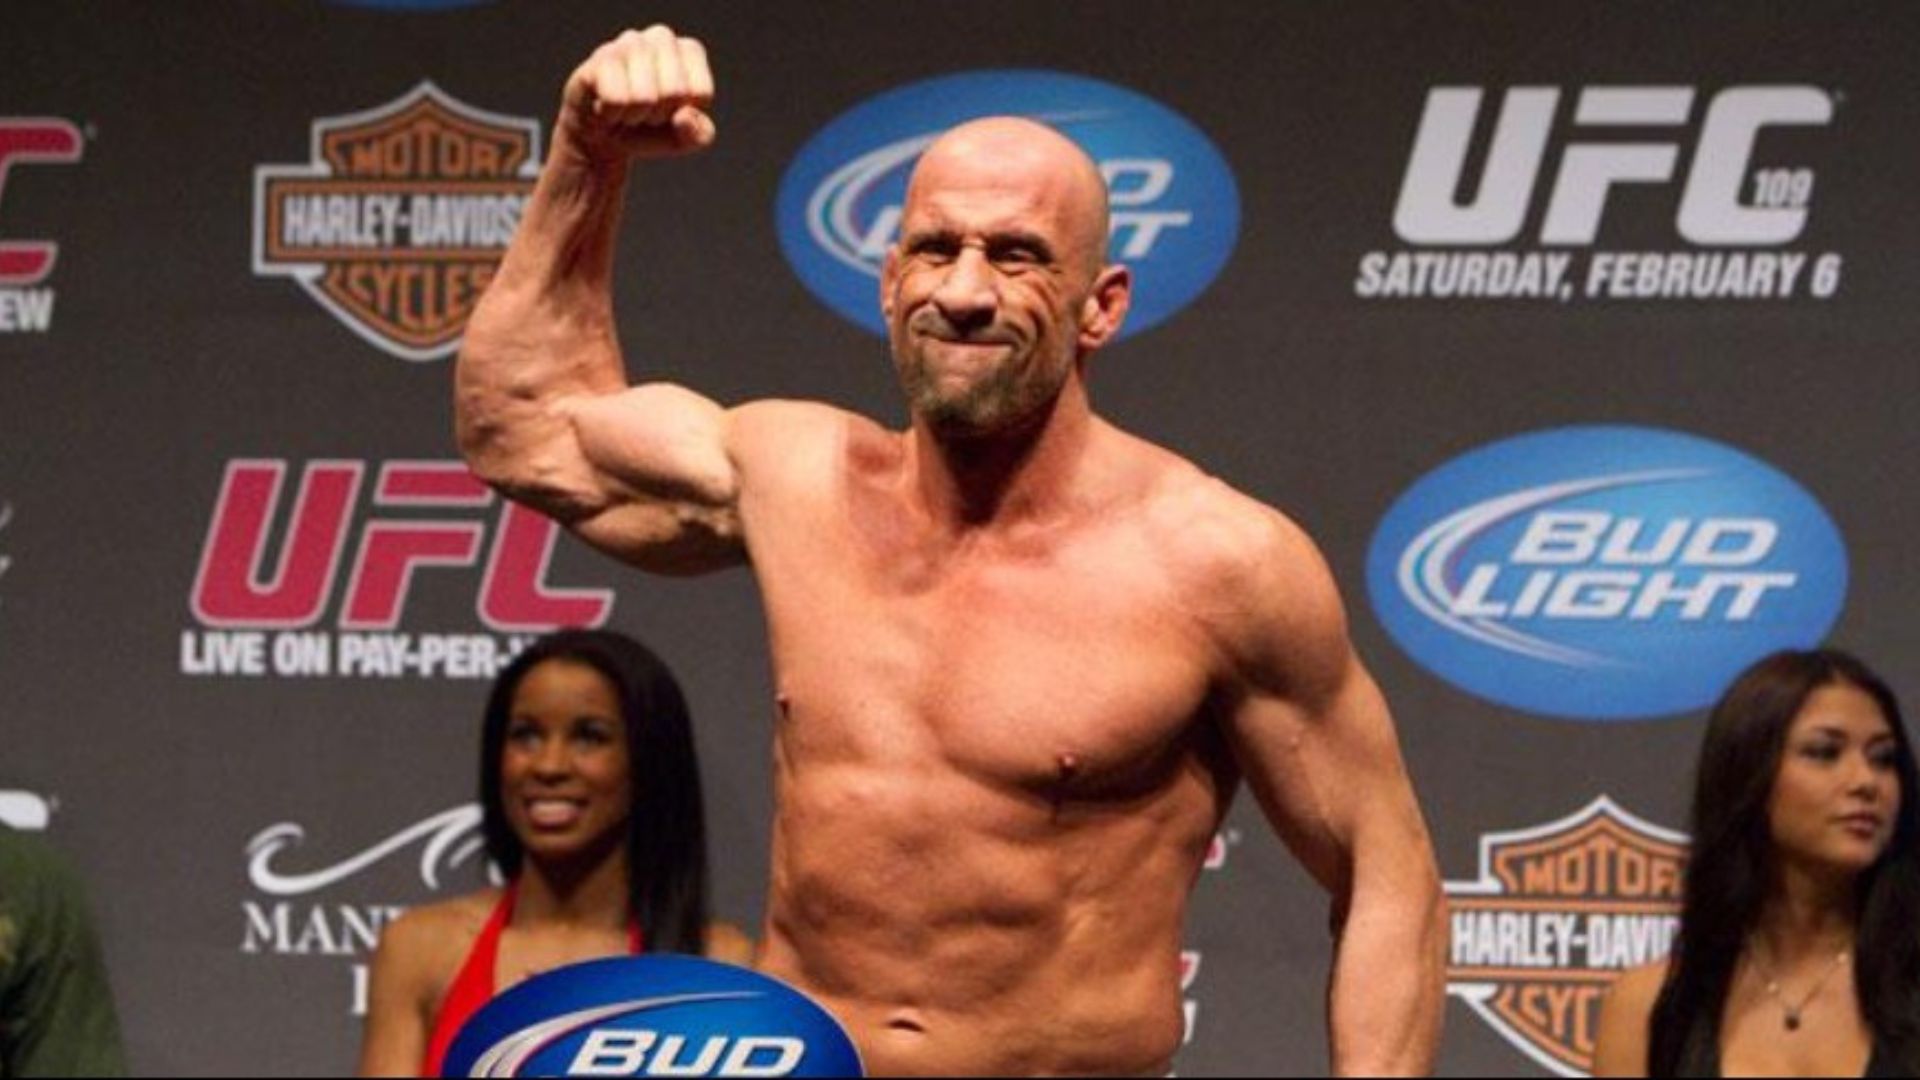 UFC Fighter Mark Coleman Hospitalized After Rescuing Parents from Fire